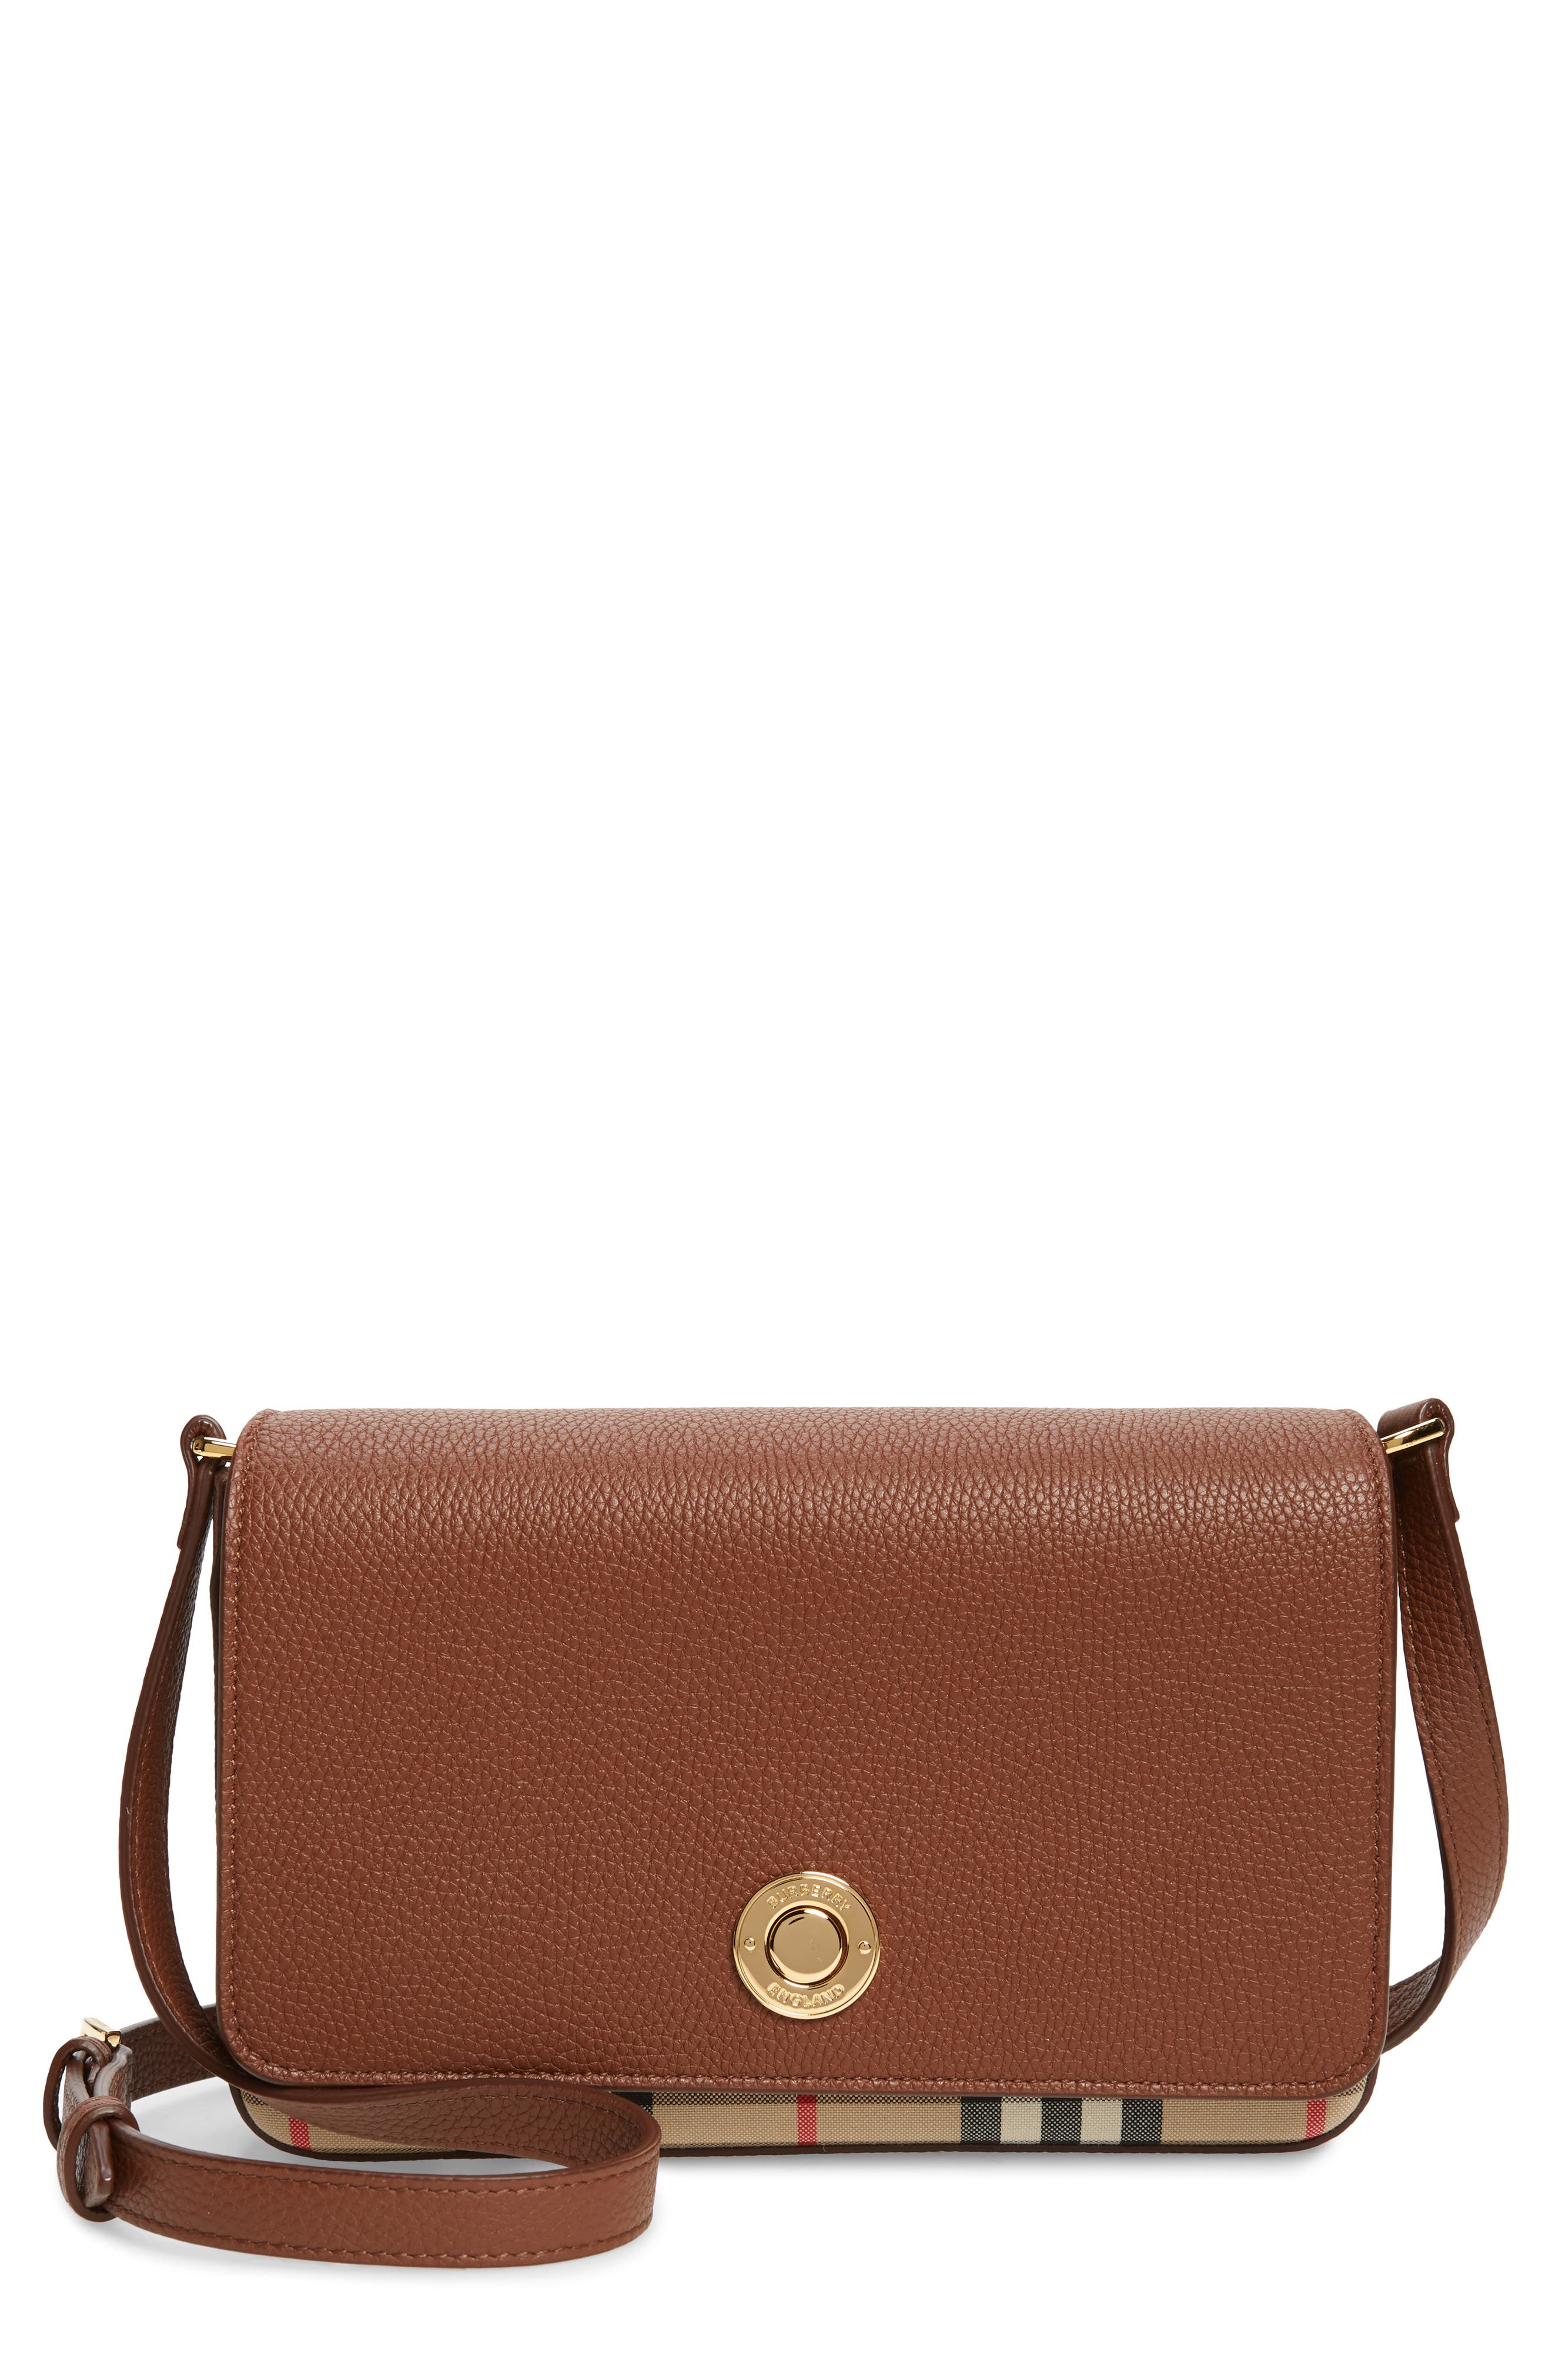 Burberry Hampshire House Check & Leather Crossbody Bag in Brown at Nordstrom